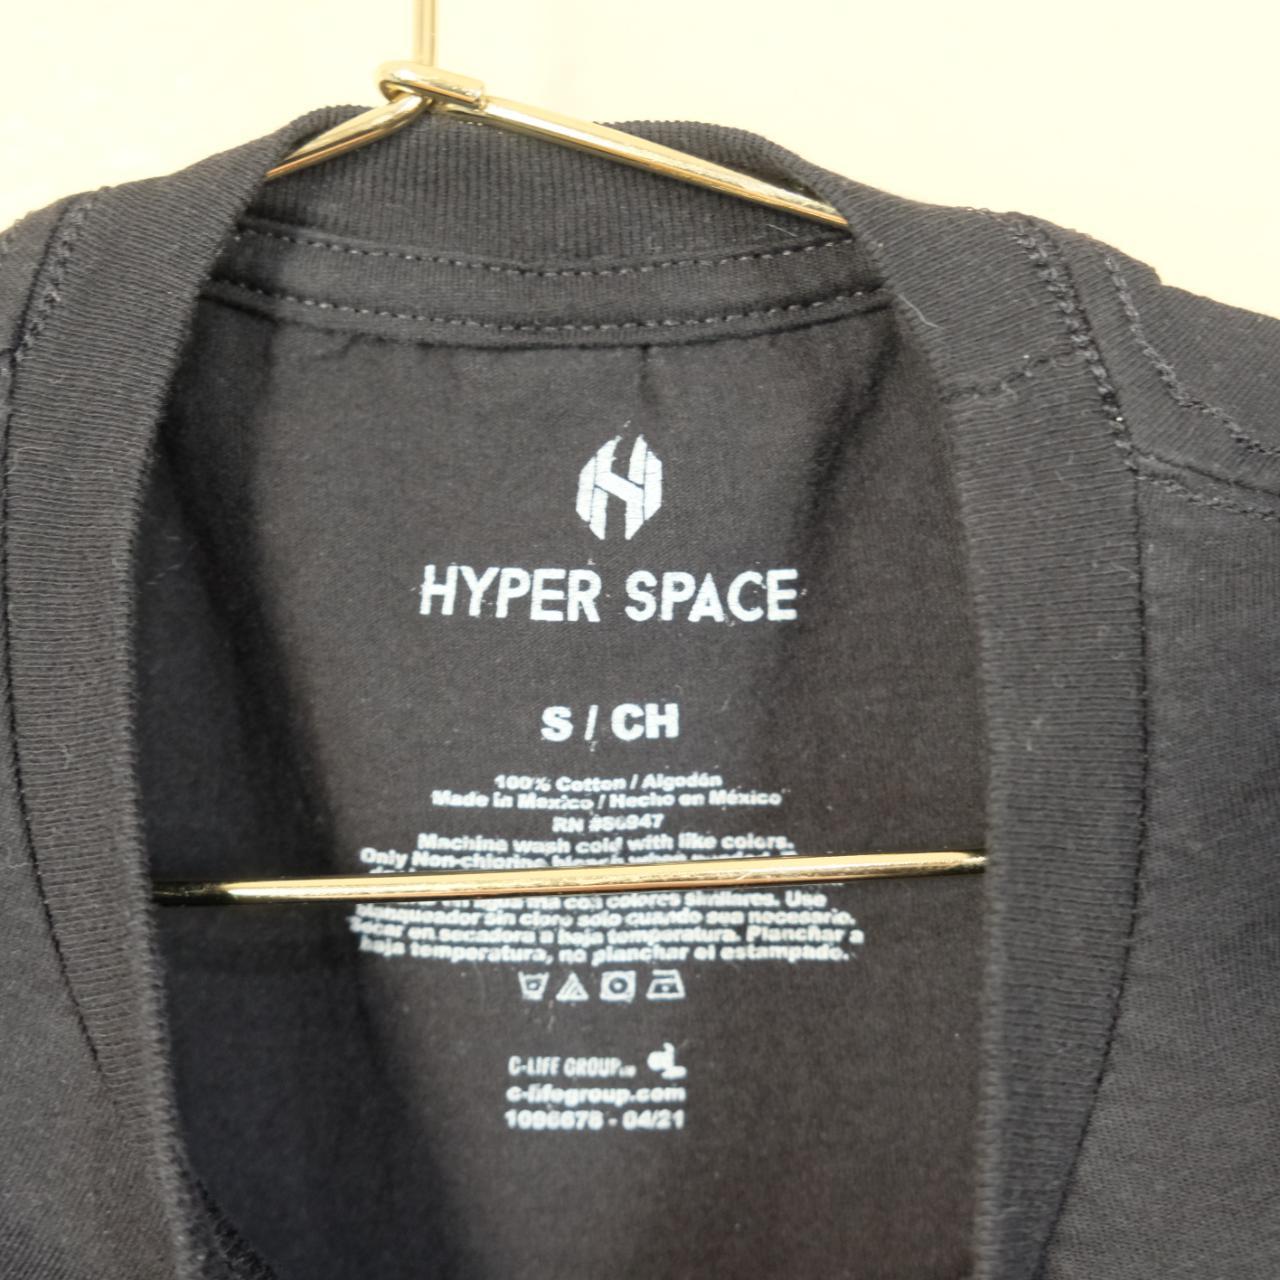 Product Image 2 - Pre-Loved NASA Astronaut Hyperspace Tee

Tag